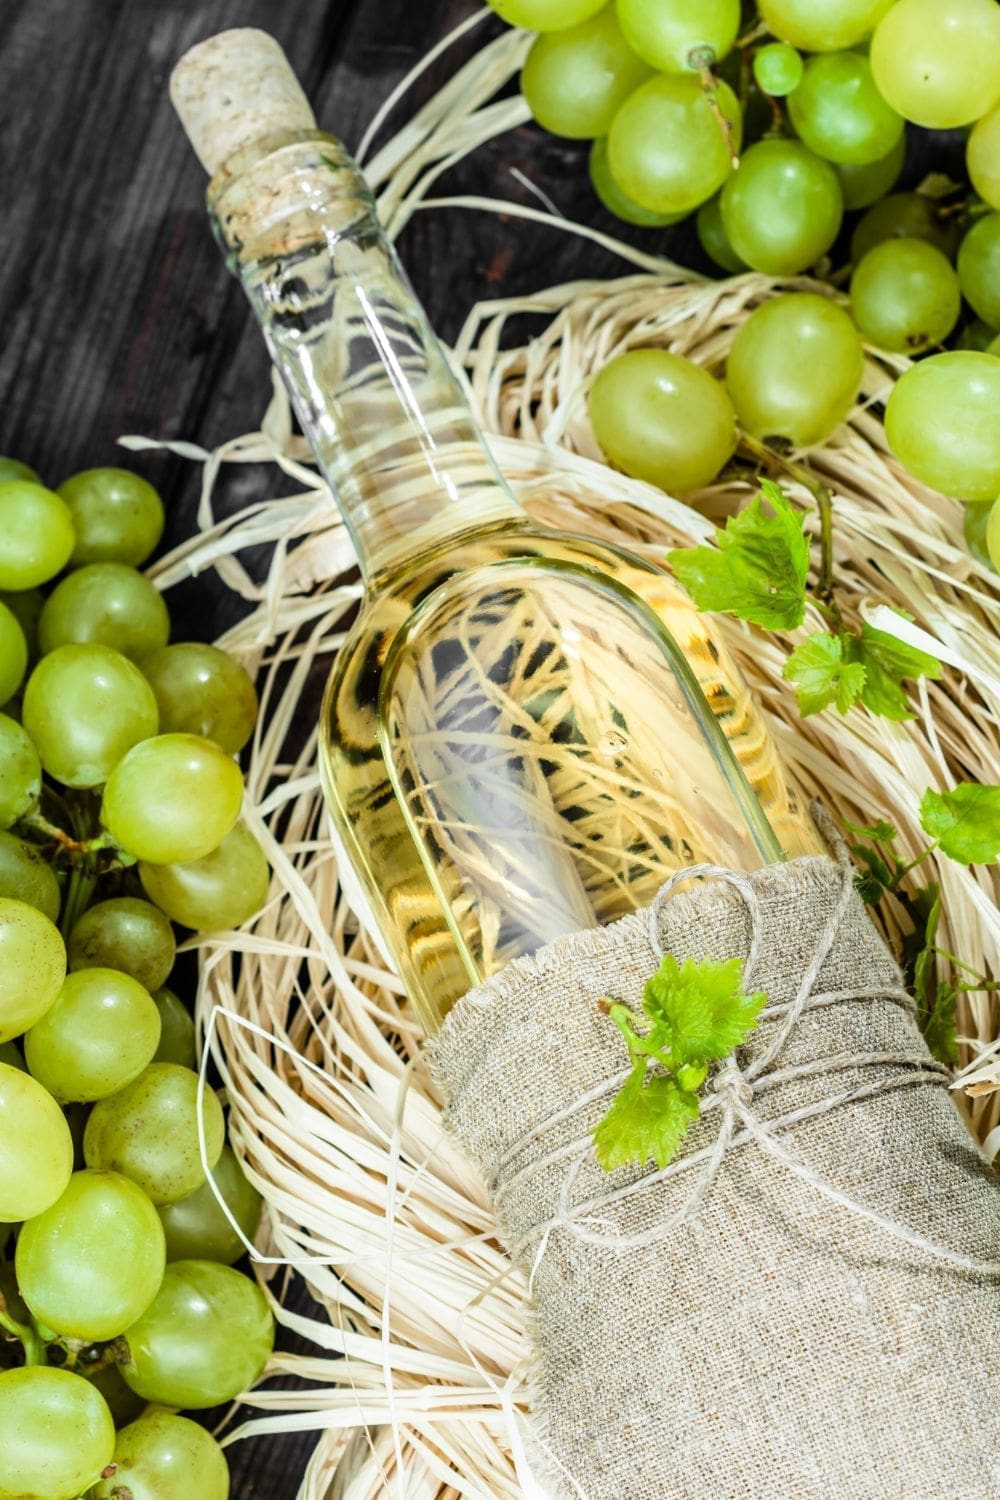 A bottle of white wine with white grapes in a wooden background.